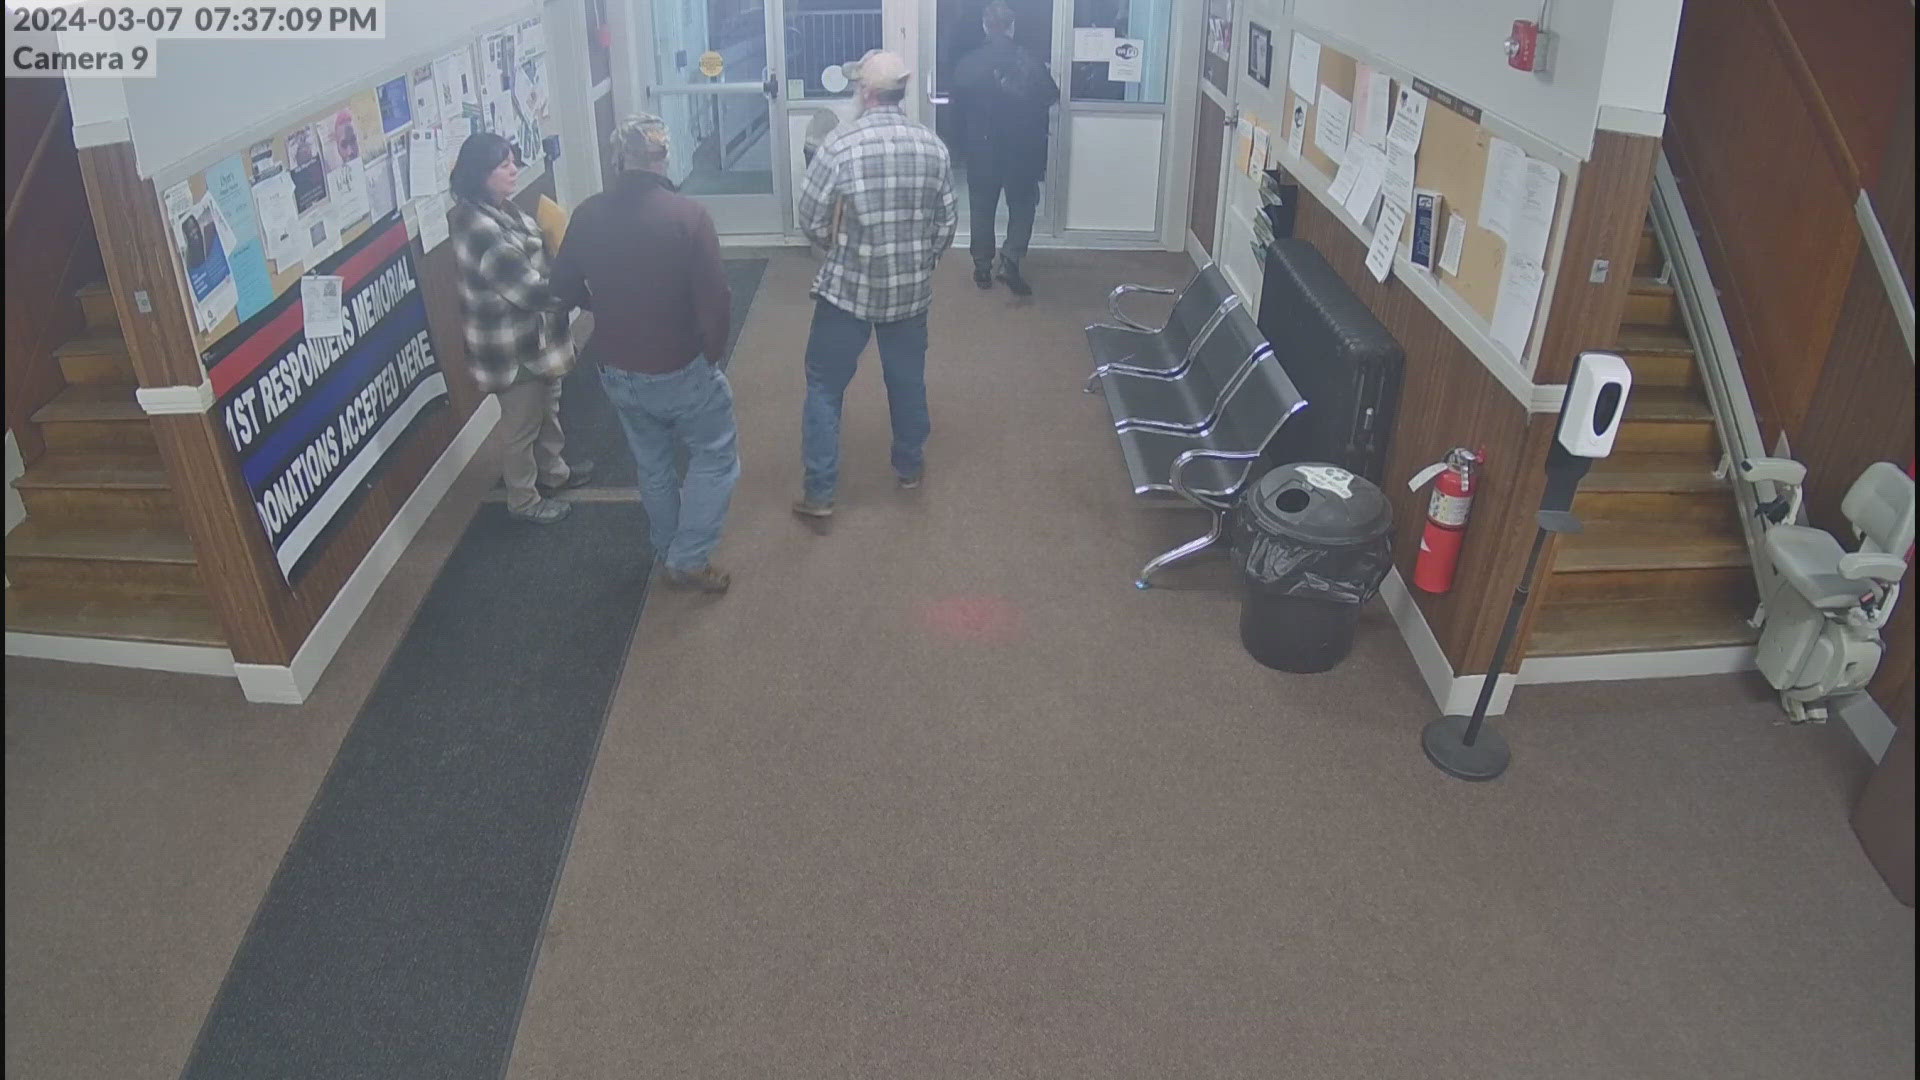 The video above shows the full 27minute conversation Susan Libby, Donald Banker and Eric Foss had in the town office lobby after an executive session on March 7.